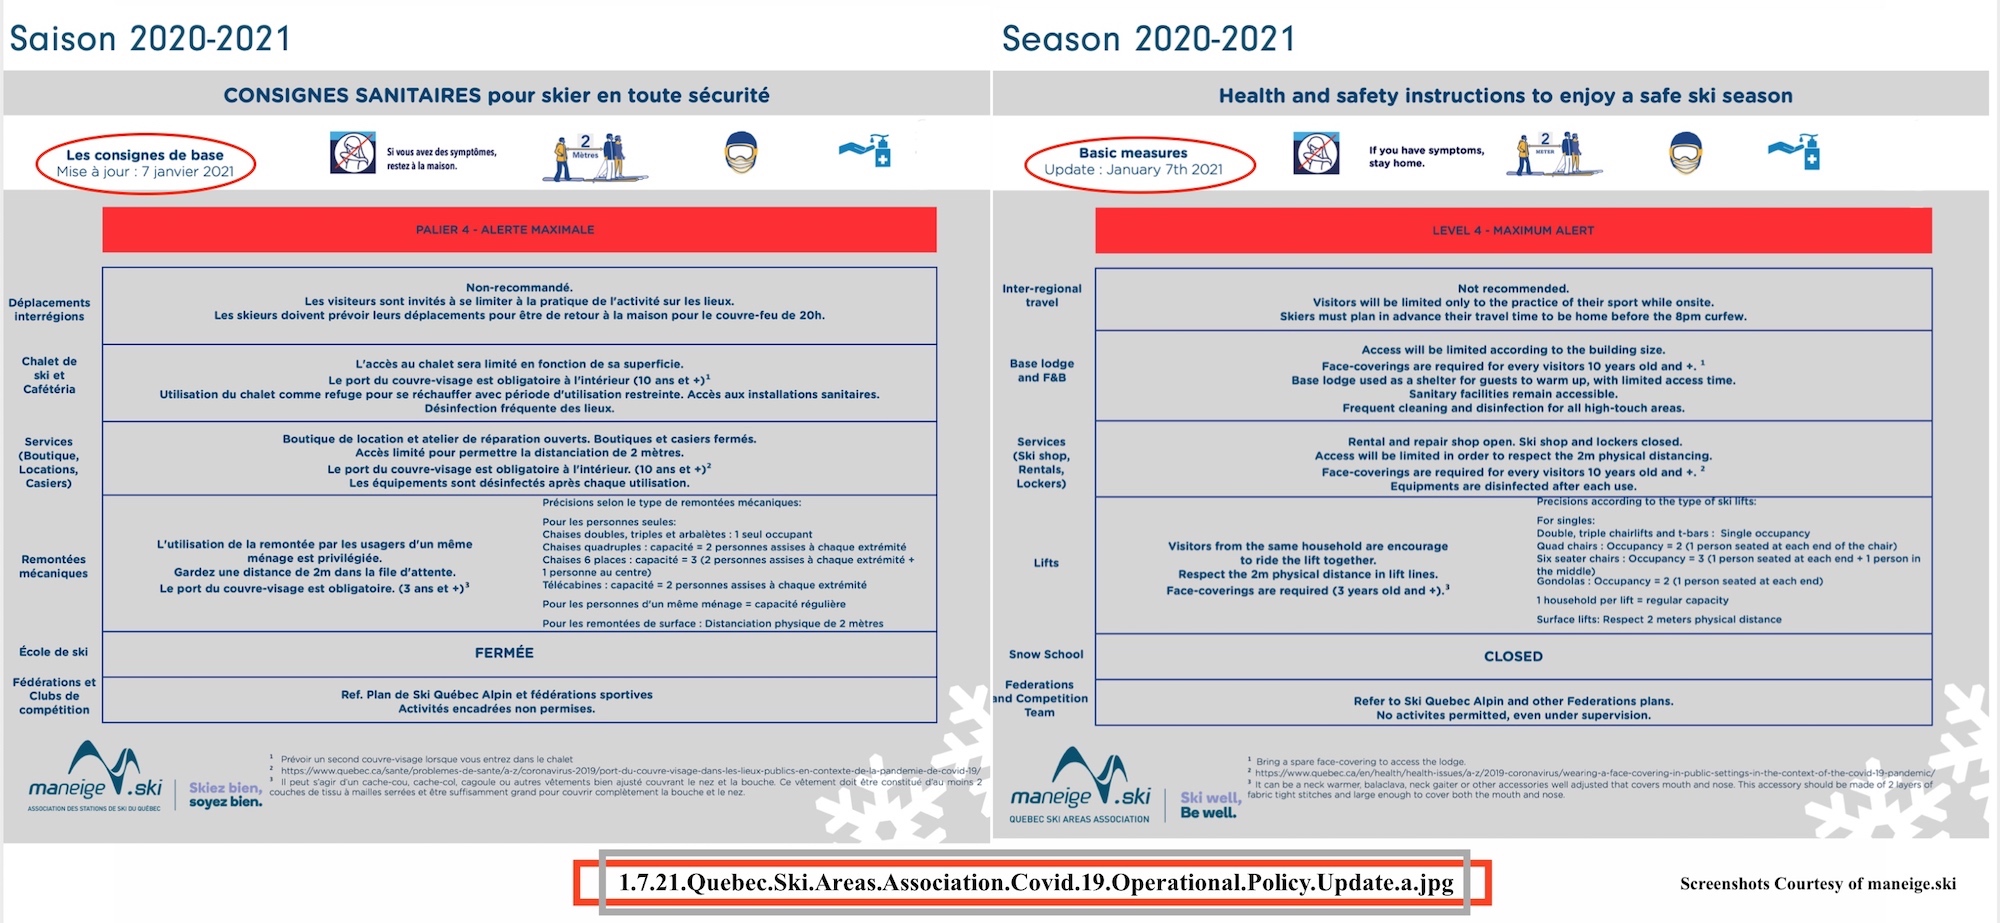 1.7.21.Quebec.Ski.Areas.Association.Covid.19.Operational.Policy.Update.a.jpg